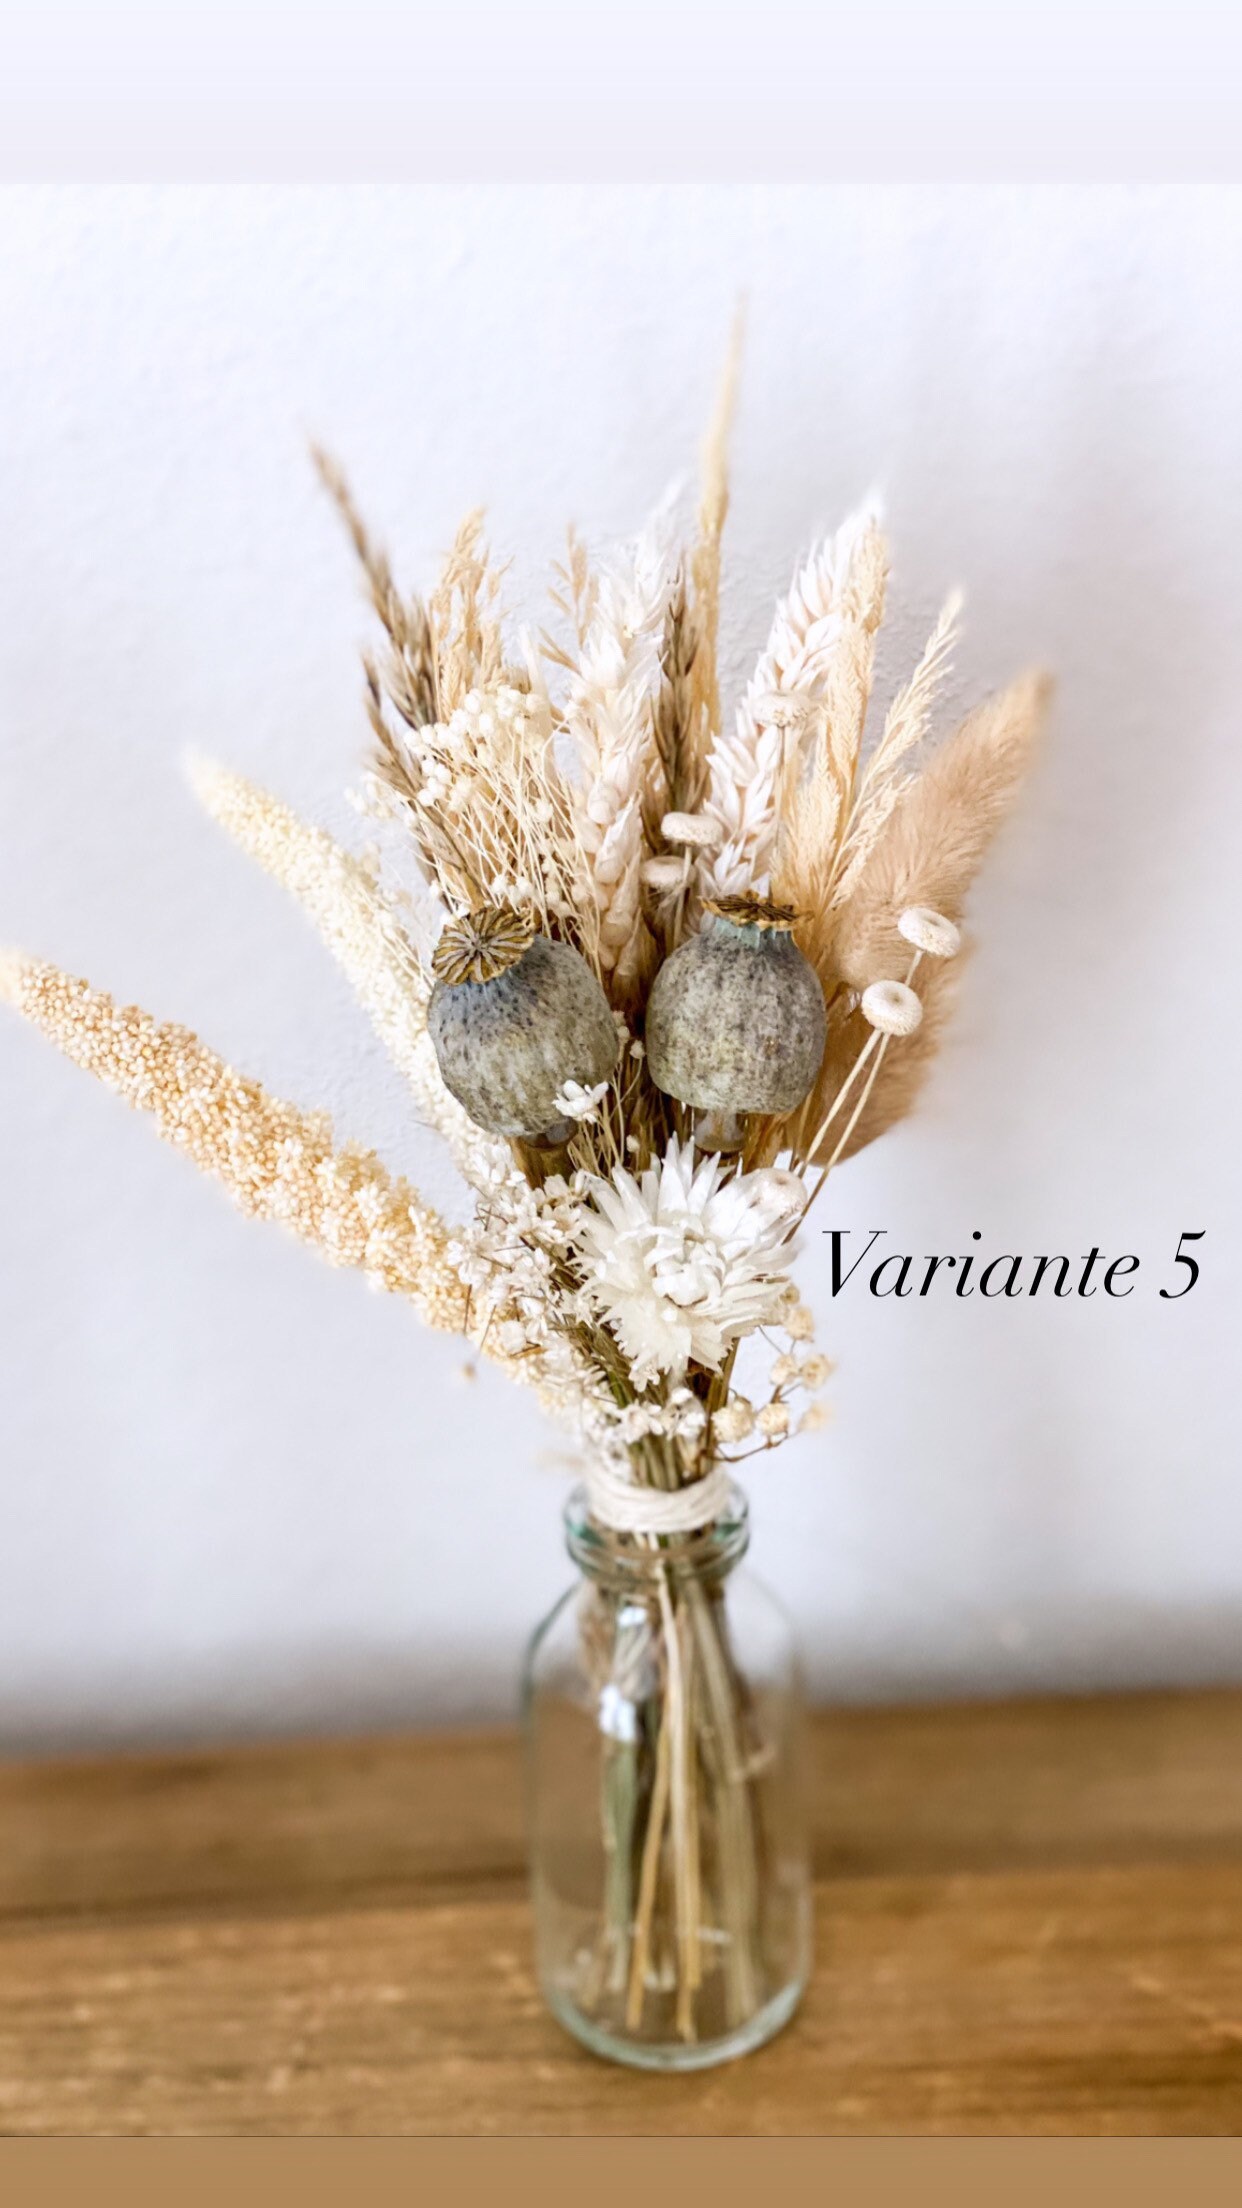 10 Pack Mini Dried Flower Bouquet 6.3'' Pink Sage White Wheat Dried Flowers  for Vase DIY Craft Photo Props Card Decor Bohemian Wedding Dried Flowers